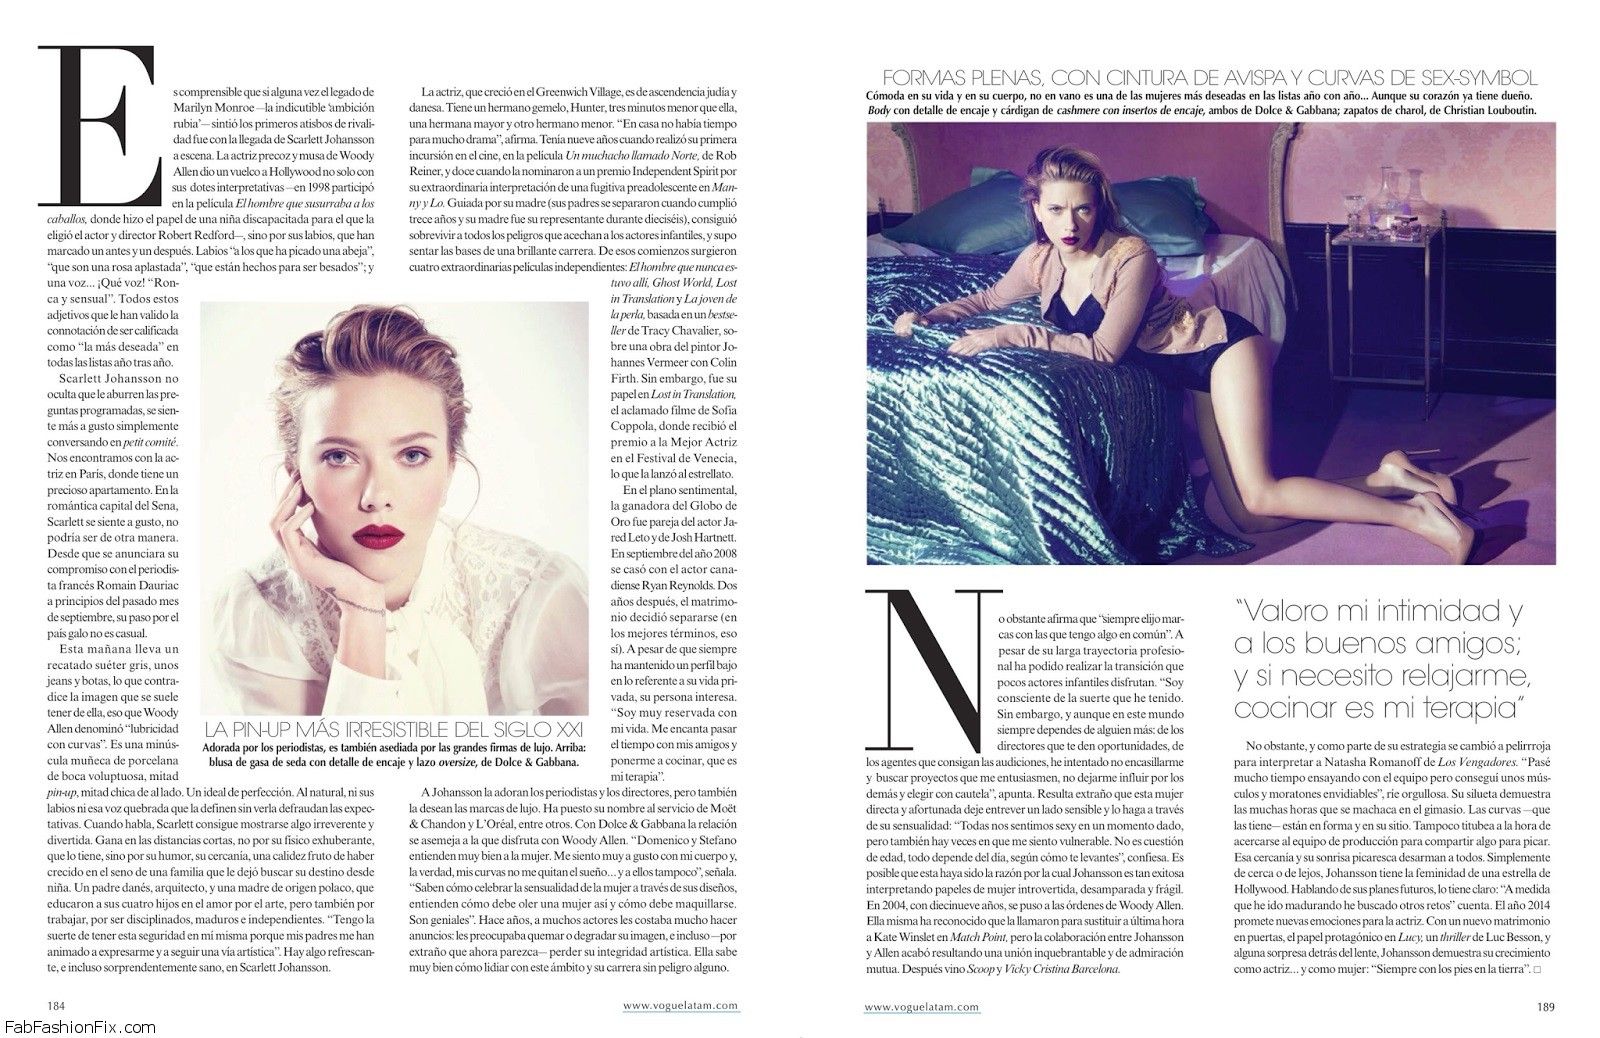 fashion_scans_remastered-scarlett_johansson-vogue_mexico-december_2013-scanned_by_vampirehorde-hq-6